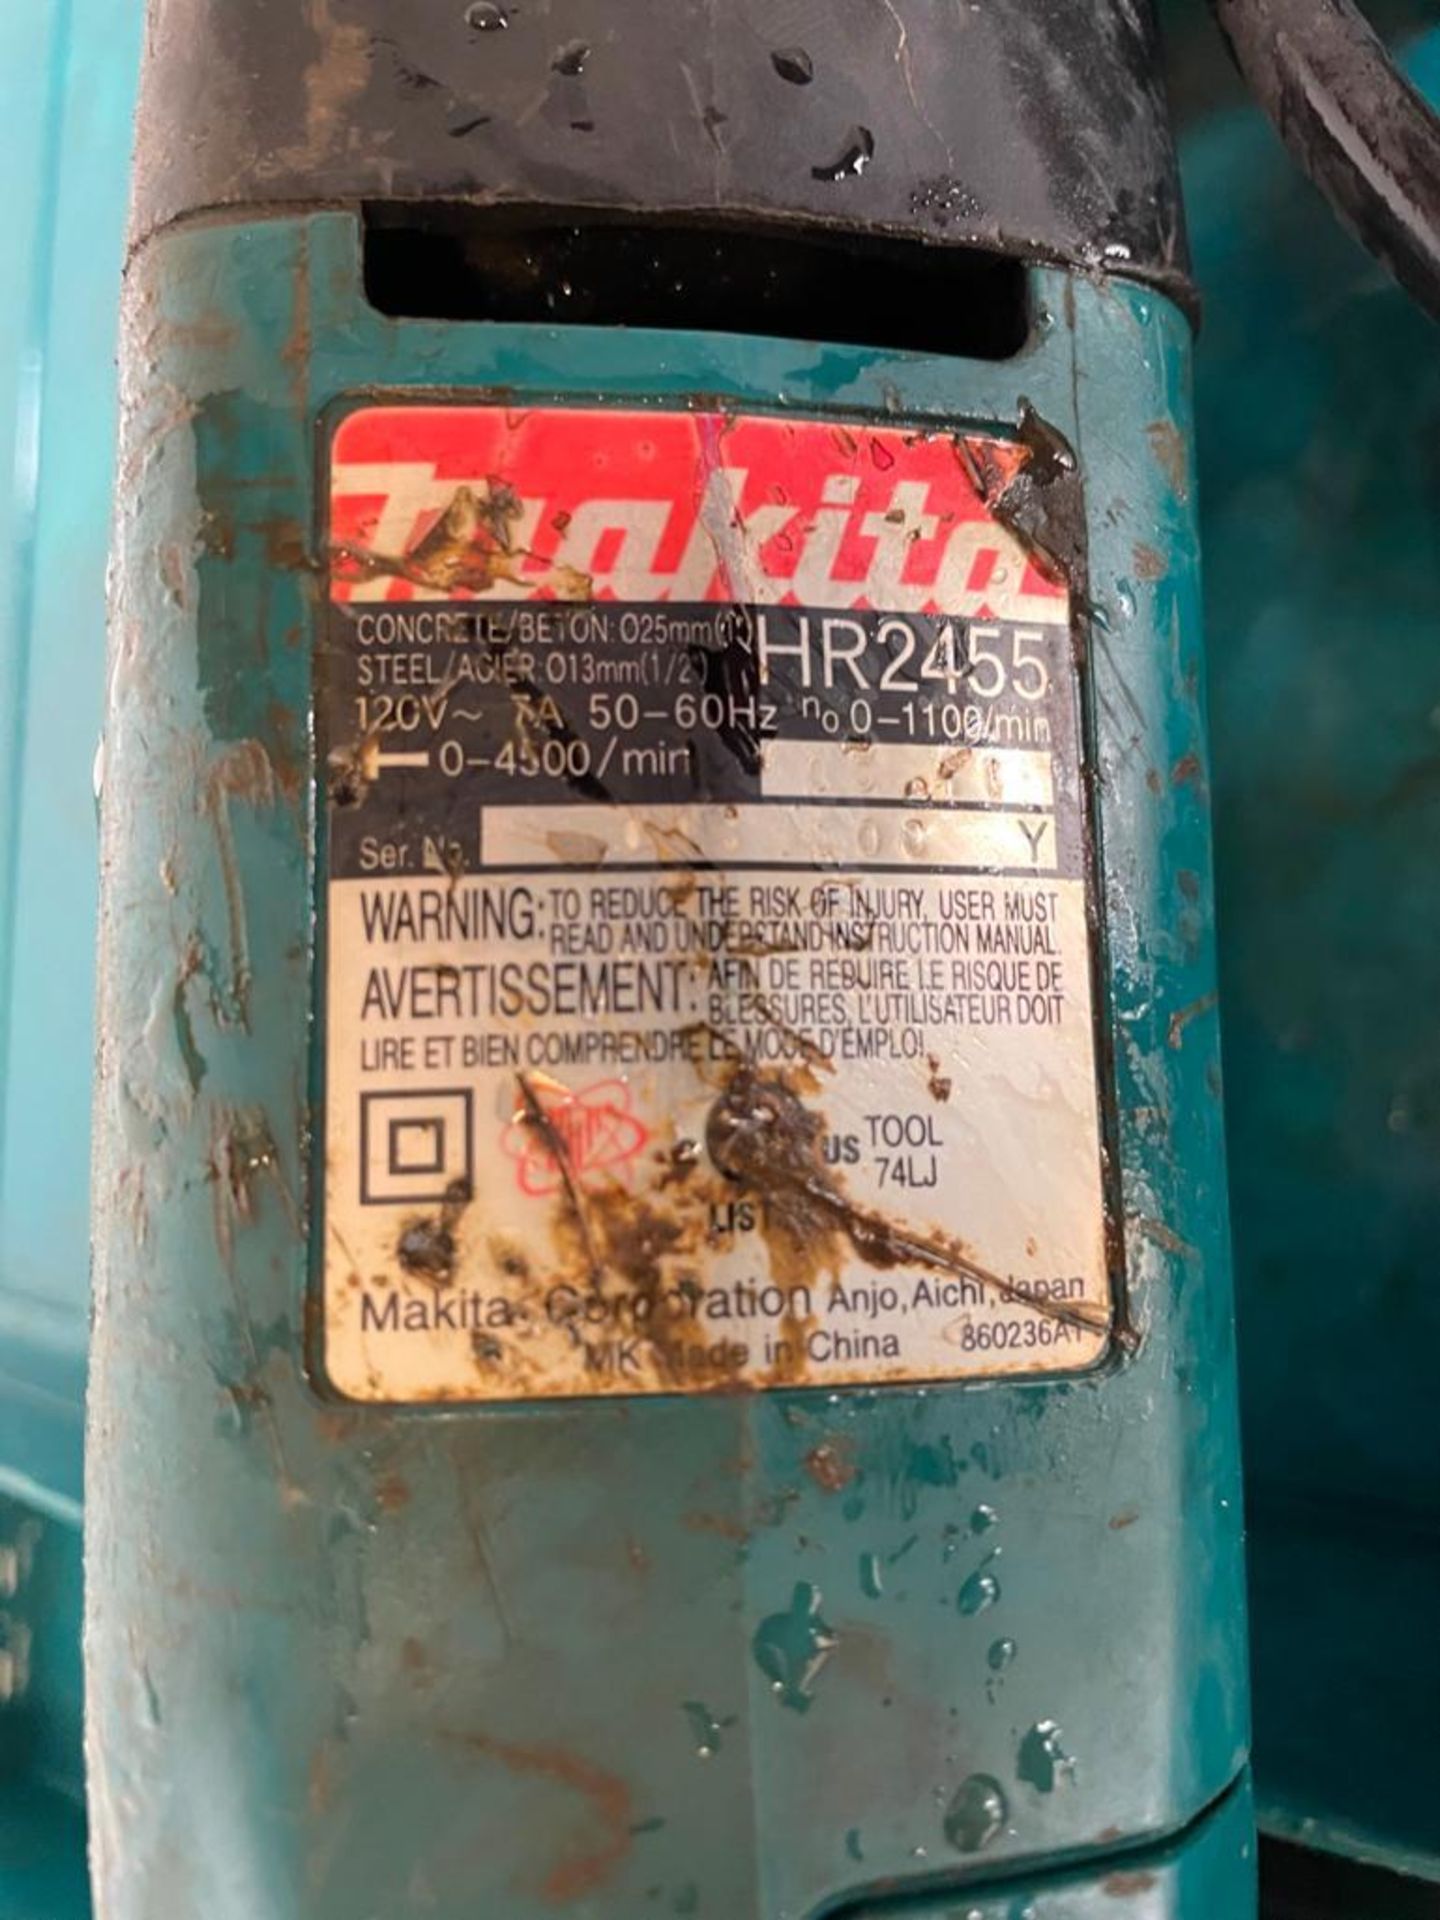 Makita HR2455 Hammer Drill, 120V. Located in Hazelwood, MO - Image 4 of 4